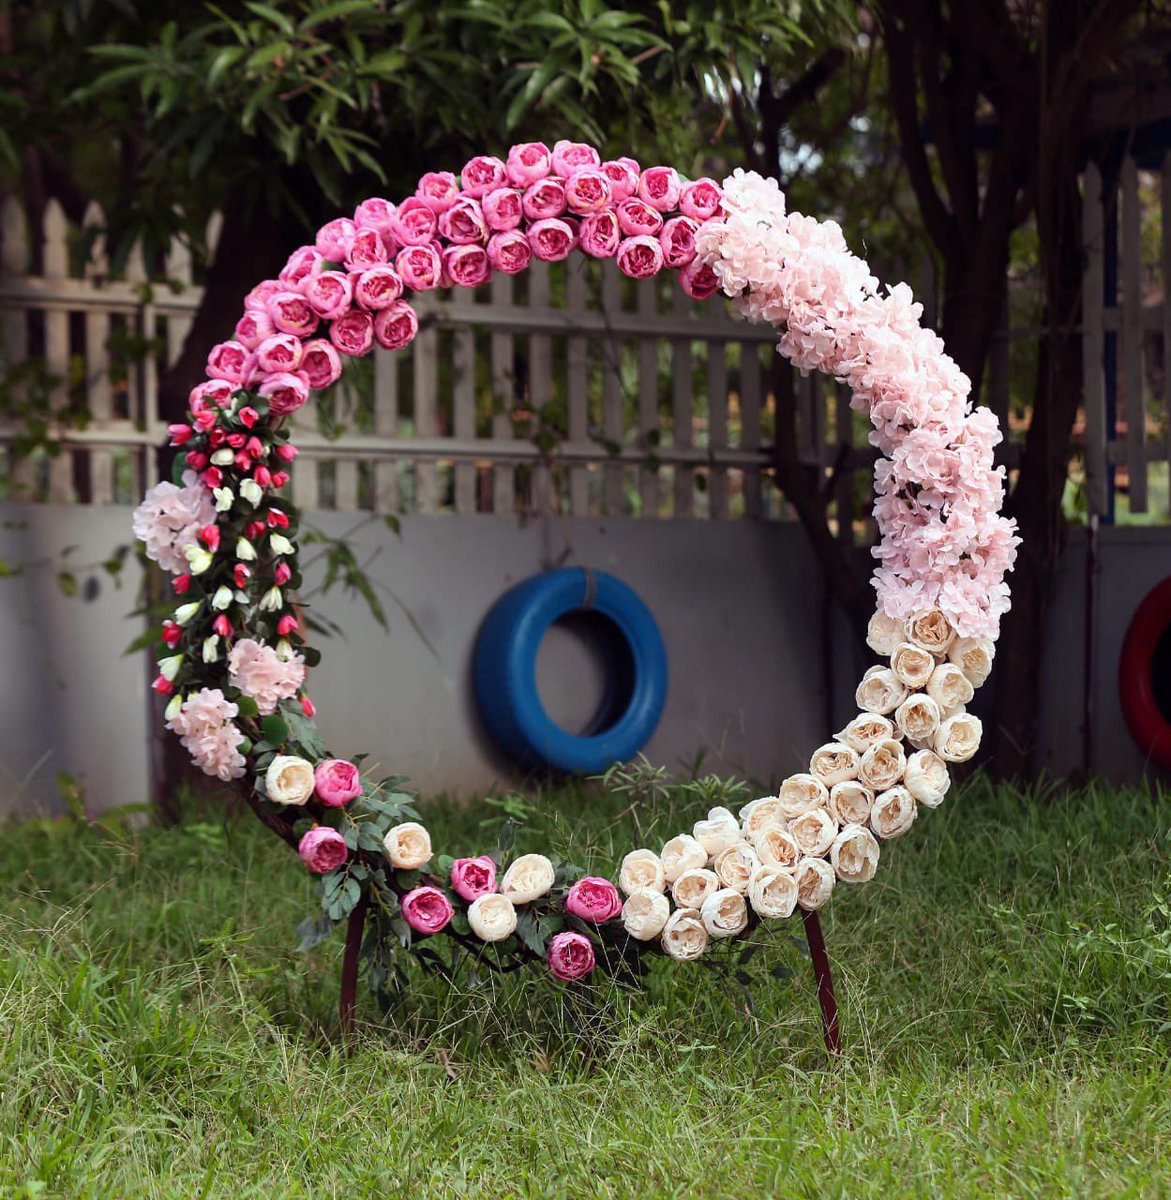 Make your wedding backdrop as unique as you with reflections of your wedding.Circular wedding arch 'A Ceremony Perfection'.#weddingarch #weddingflowers #wedding #weddingideas #weddinginspiration #flowerarch #weddingflowers #weddingdecor #floralarch #flowerarch #thekeylightstudios